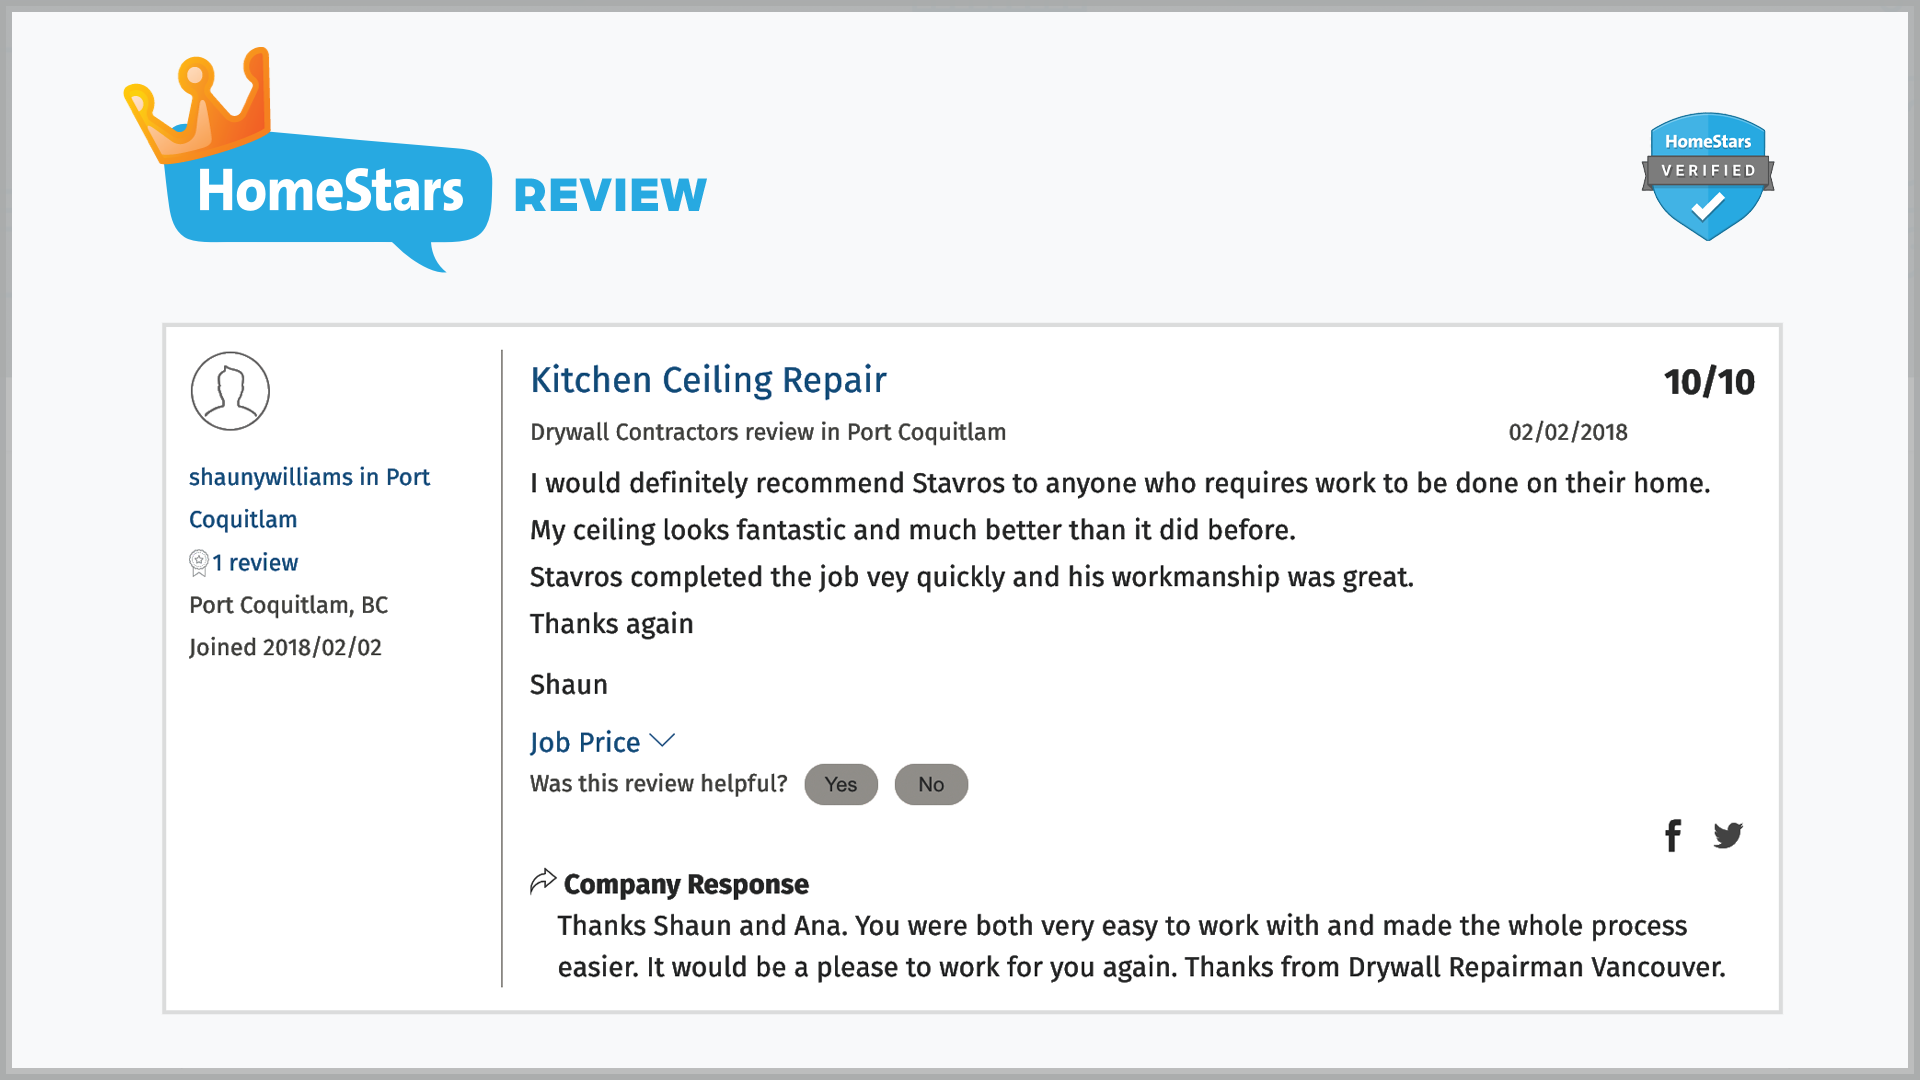 homestars-review-10-out-of-10-drywall-repairman-vancouver-bc-canada-7